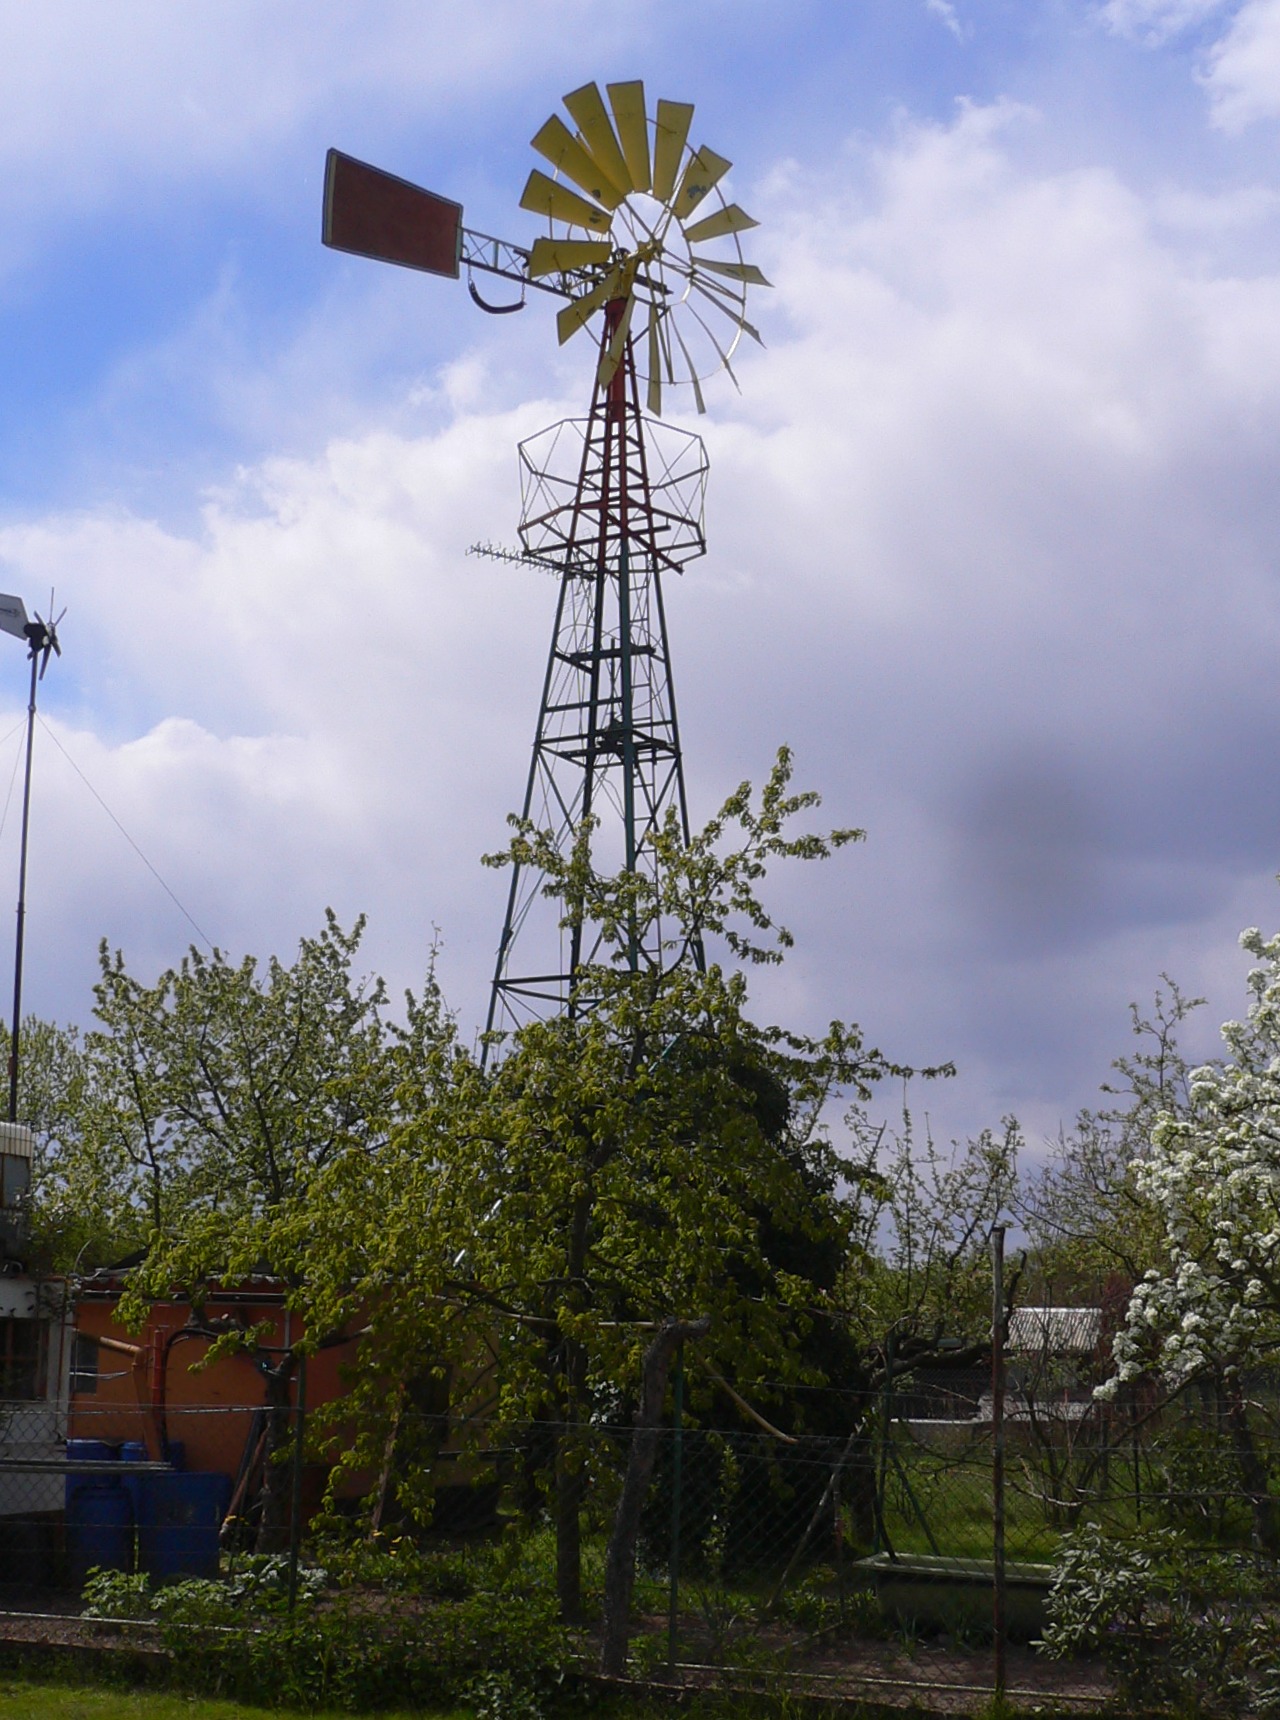 Image of a Western windmill